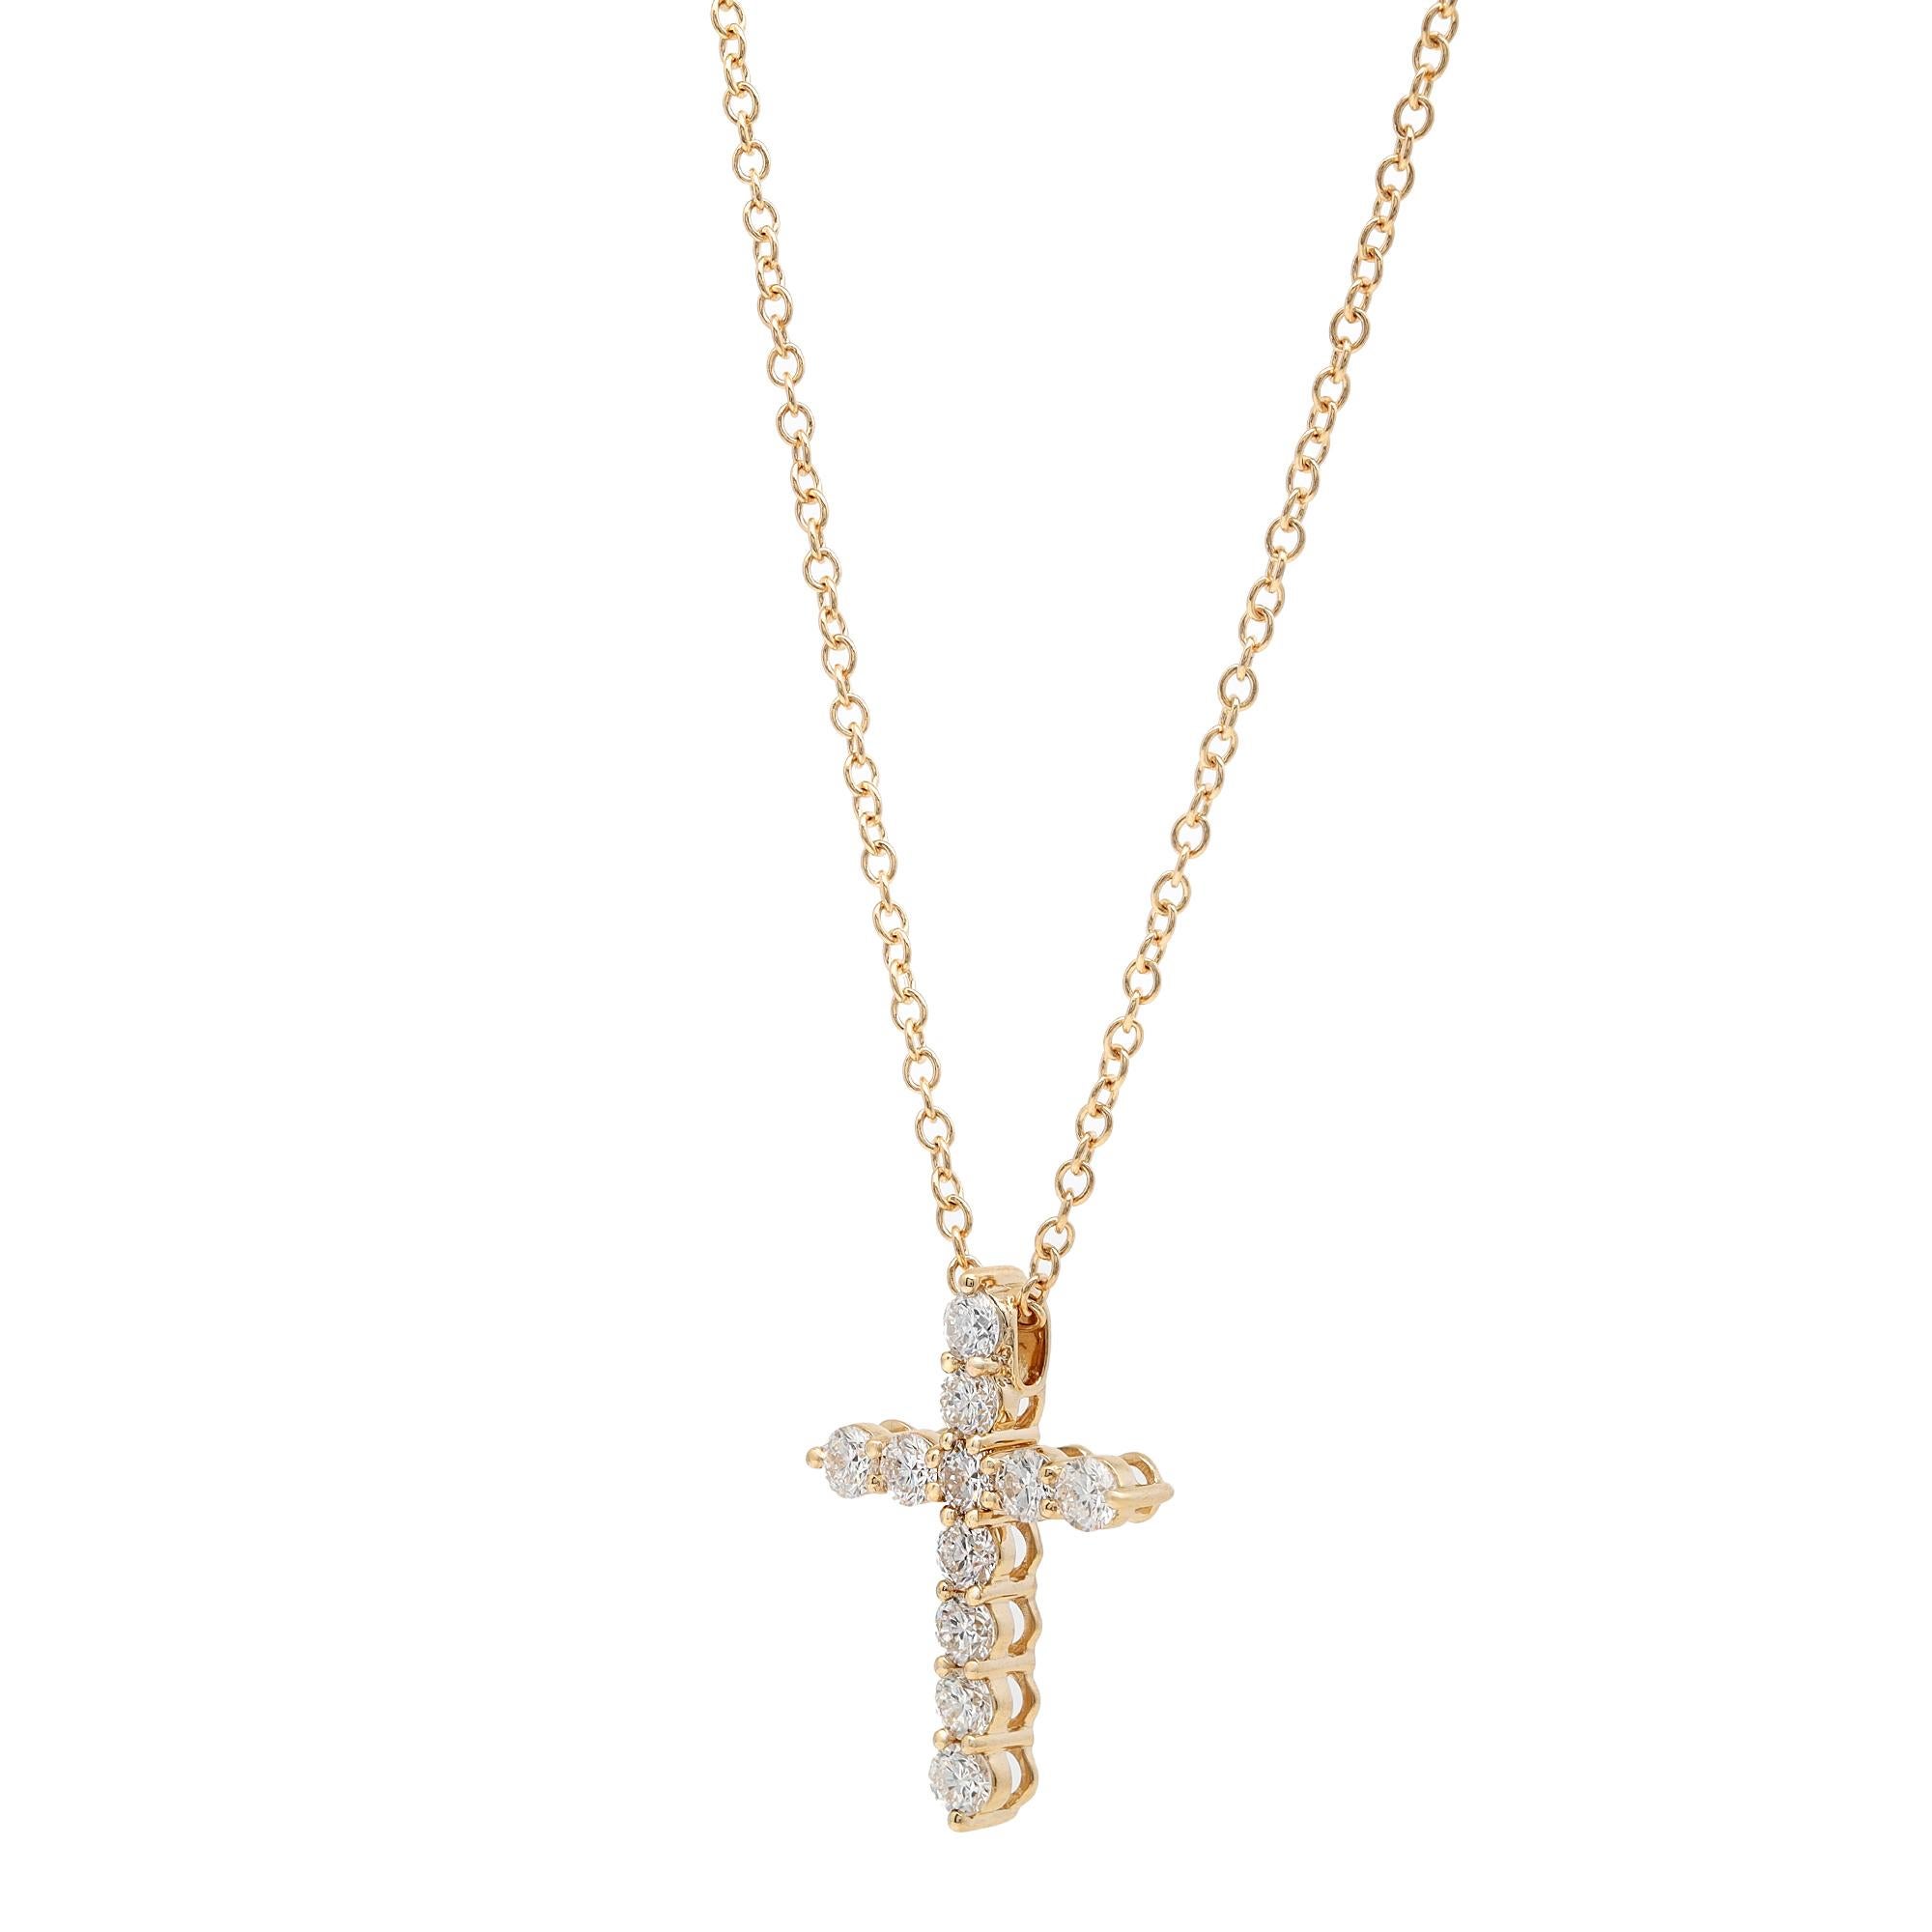 1.00cttw Rachel Koen Round Cut Diamond Cross Pendant Necklace 18K Yellow Gold In New Condition For Sale In New York, NY